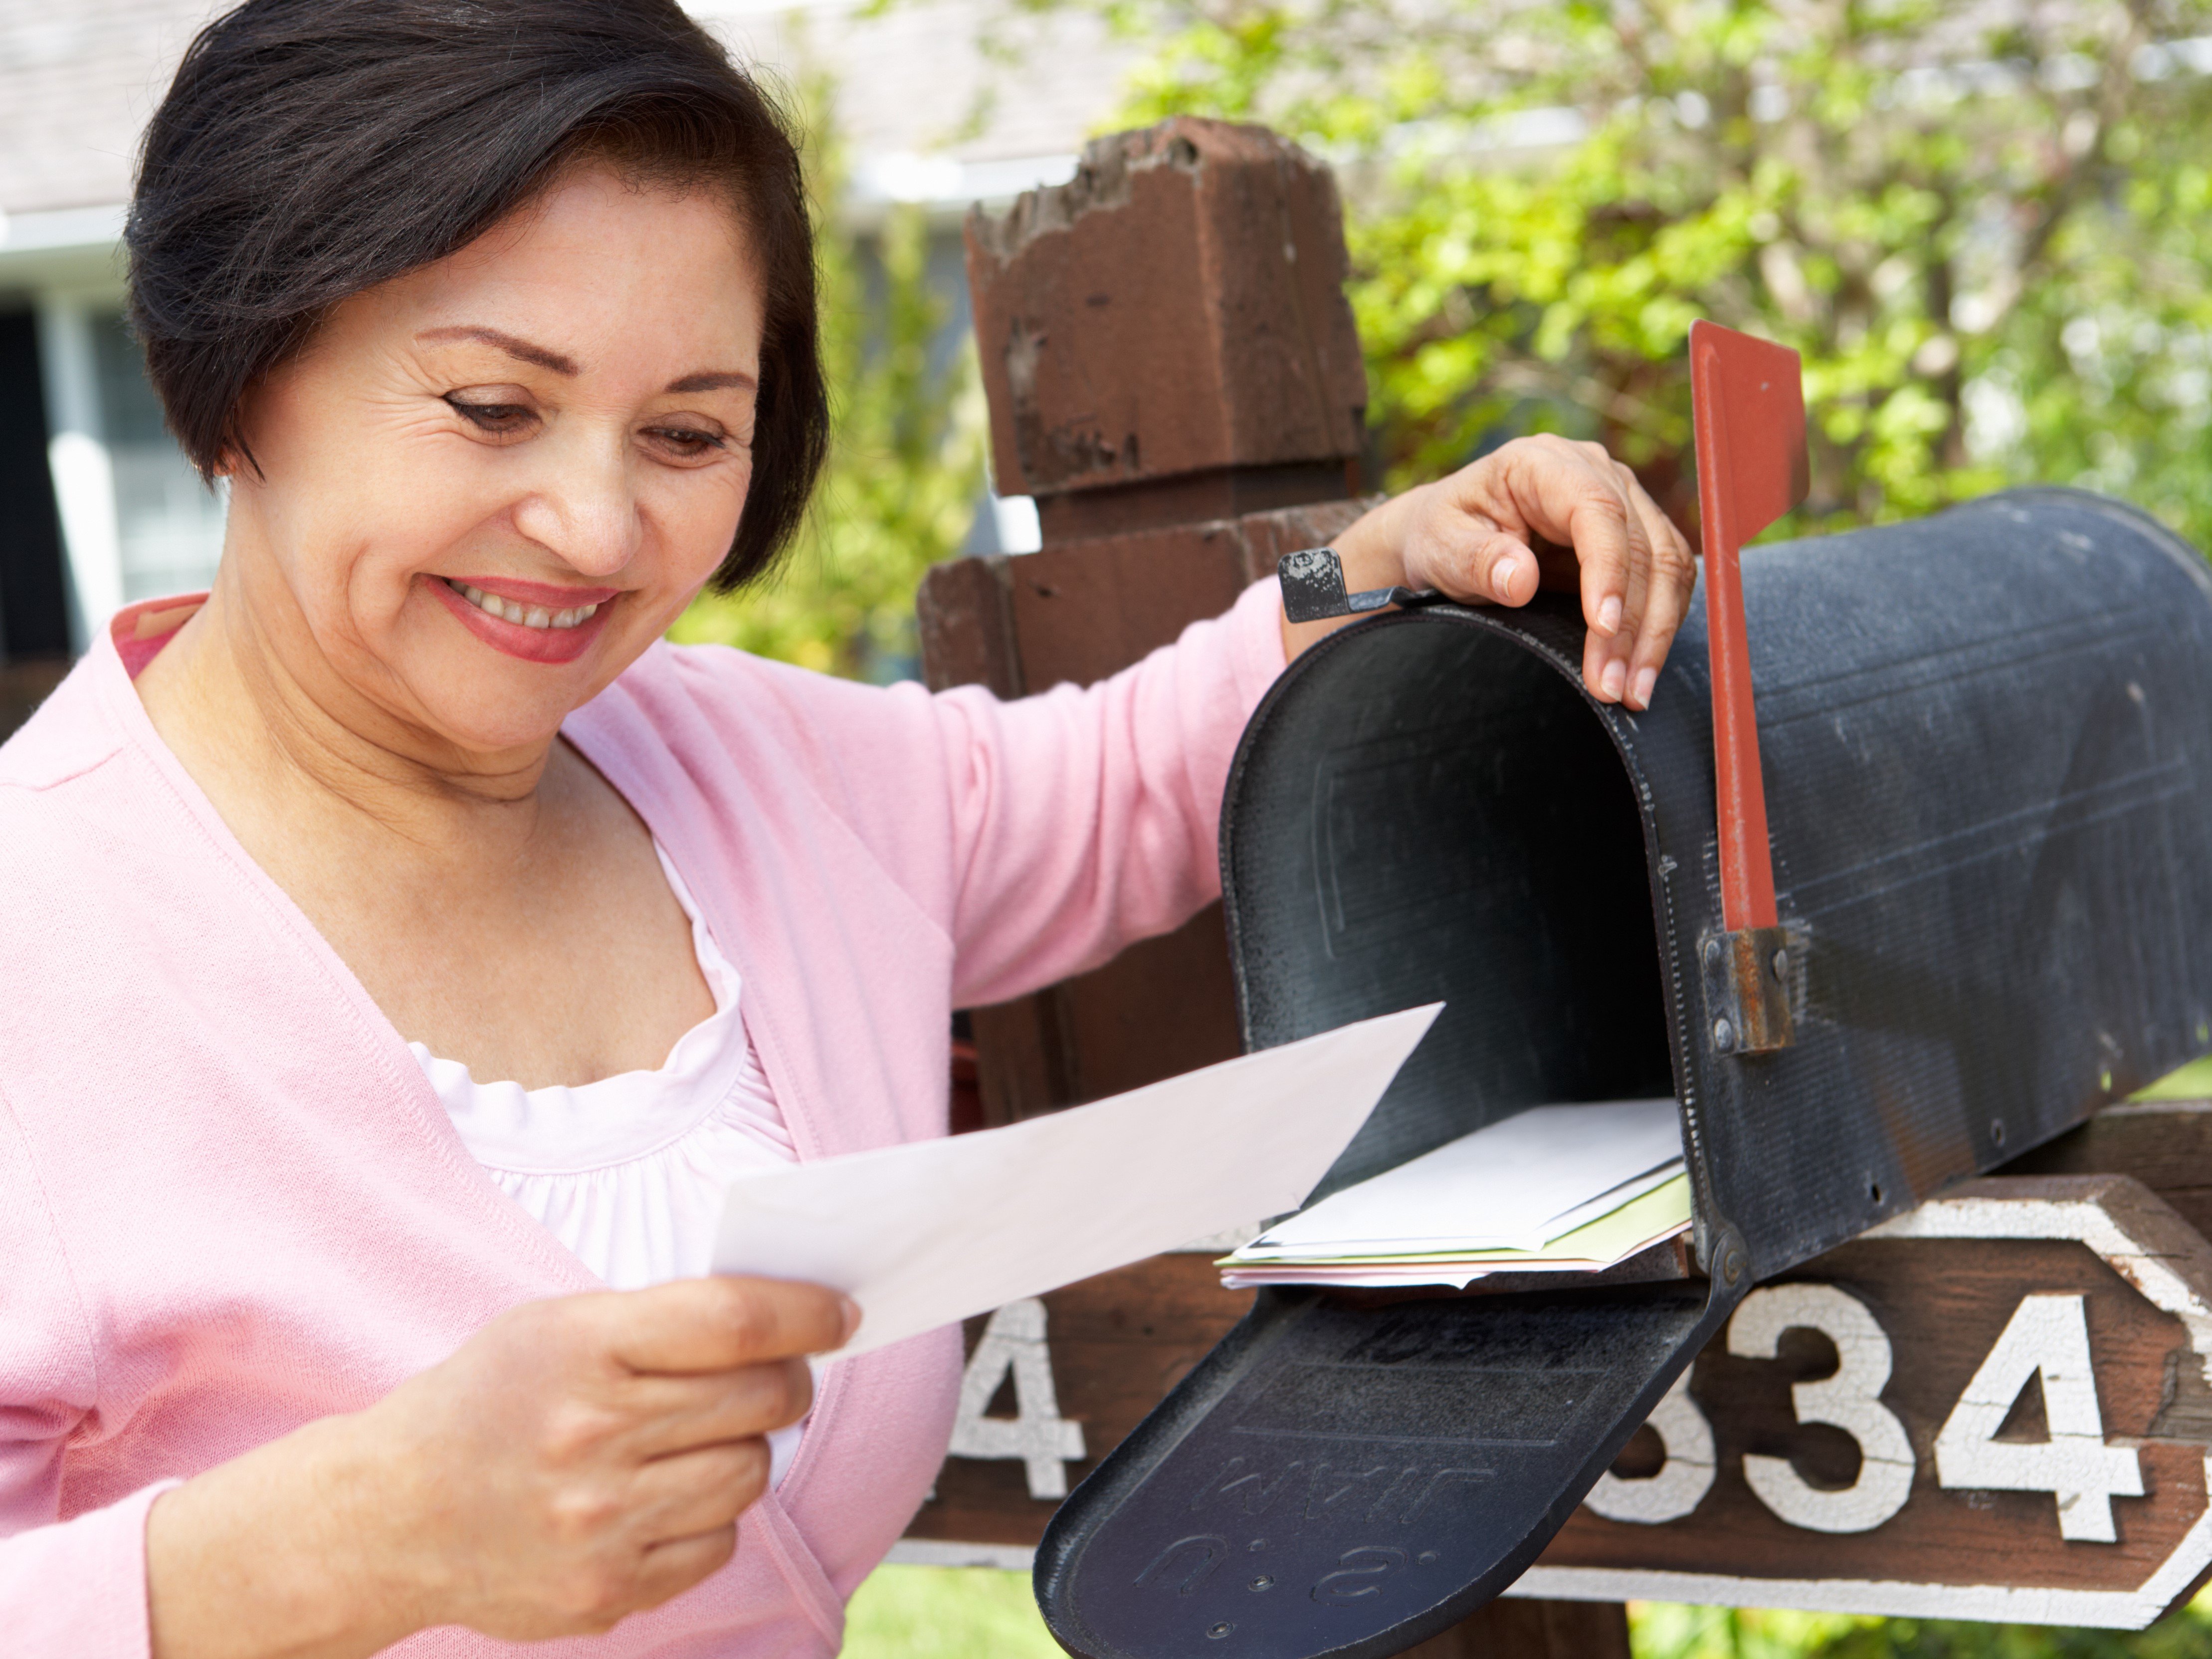 Customizing Direct Mail Campaigns by Age Group